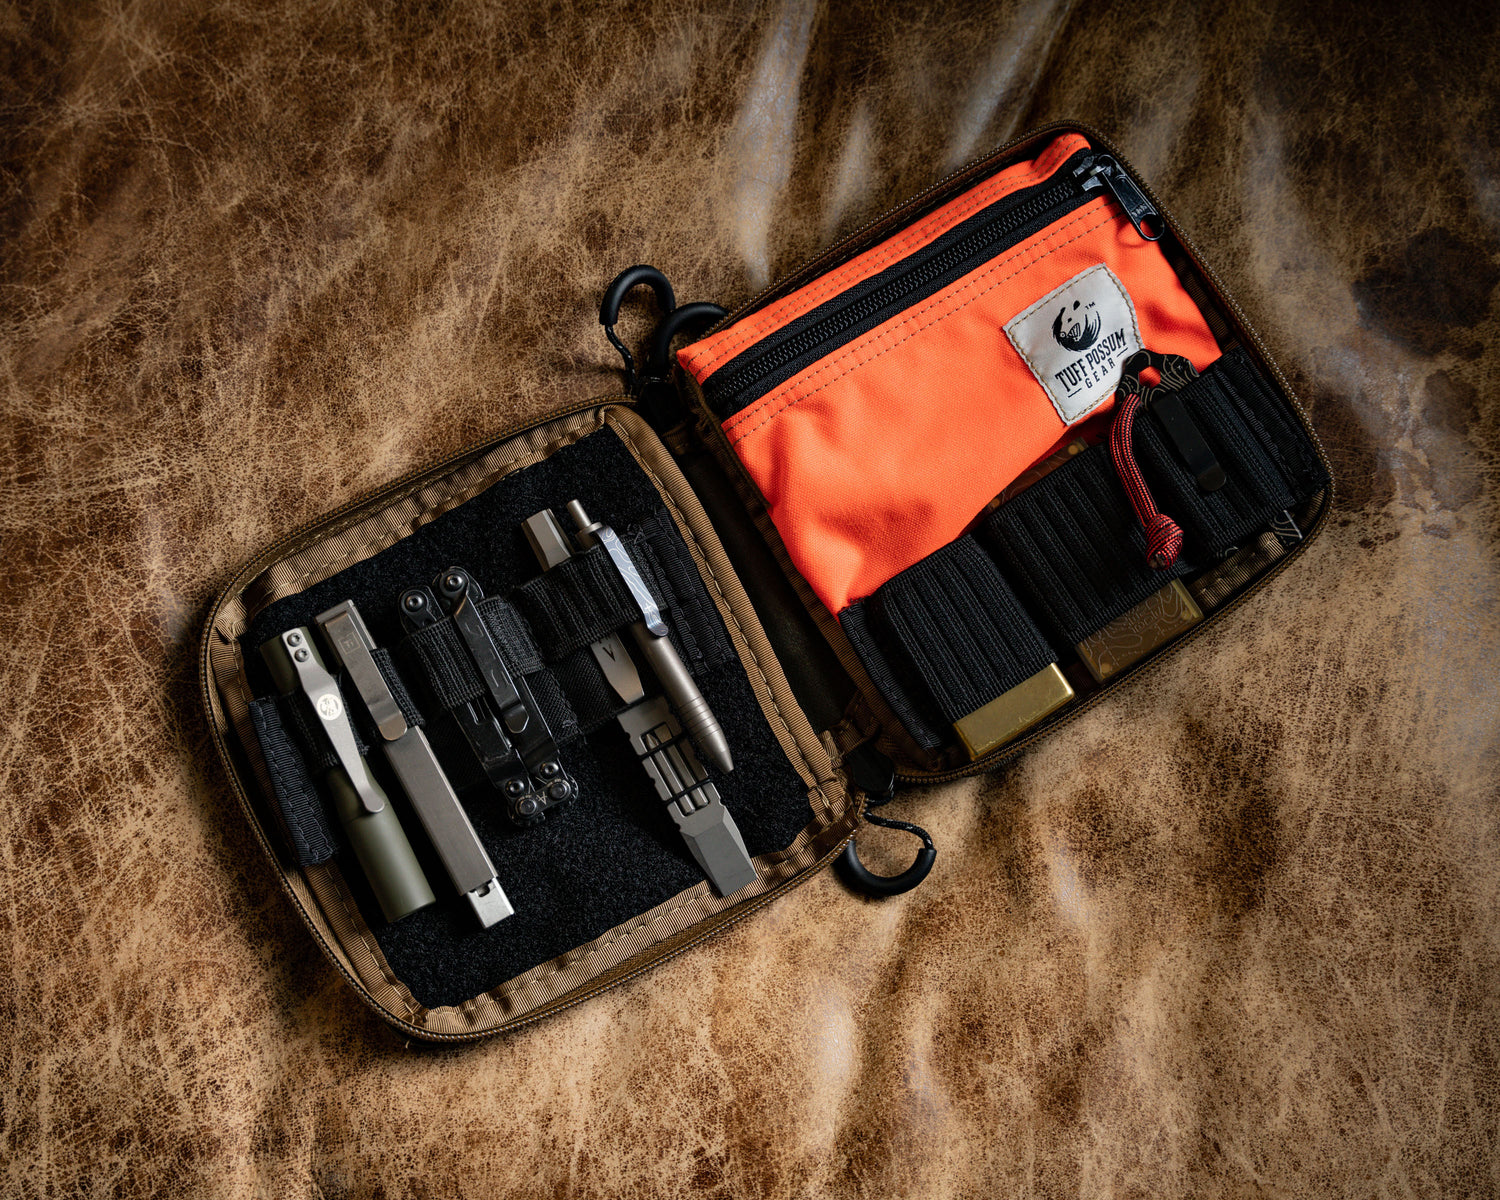 Carry Commission / Blue Ridge Overland Gear EDC Pouch Bundle full open view with lots of gear held in the elastic keepers showcasing the storage capacity on a leather background